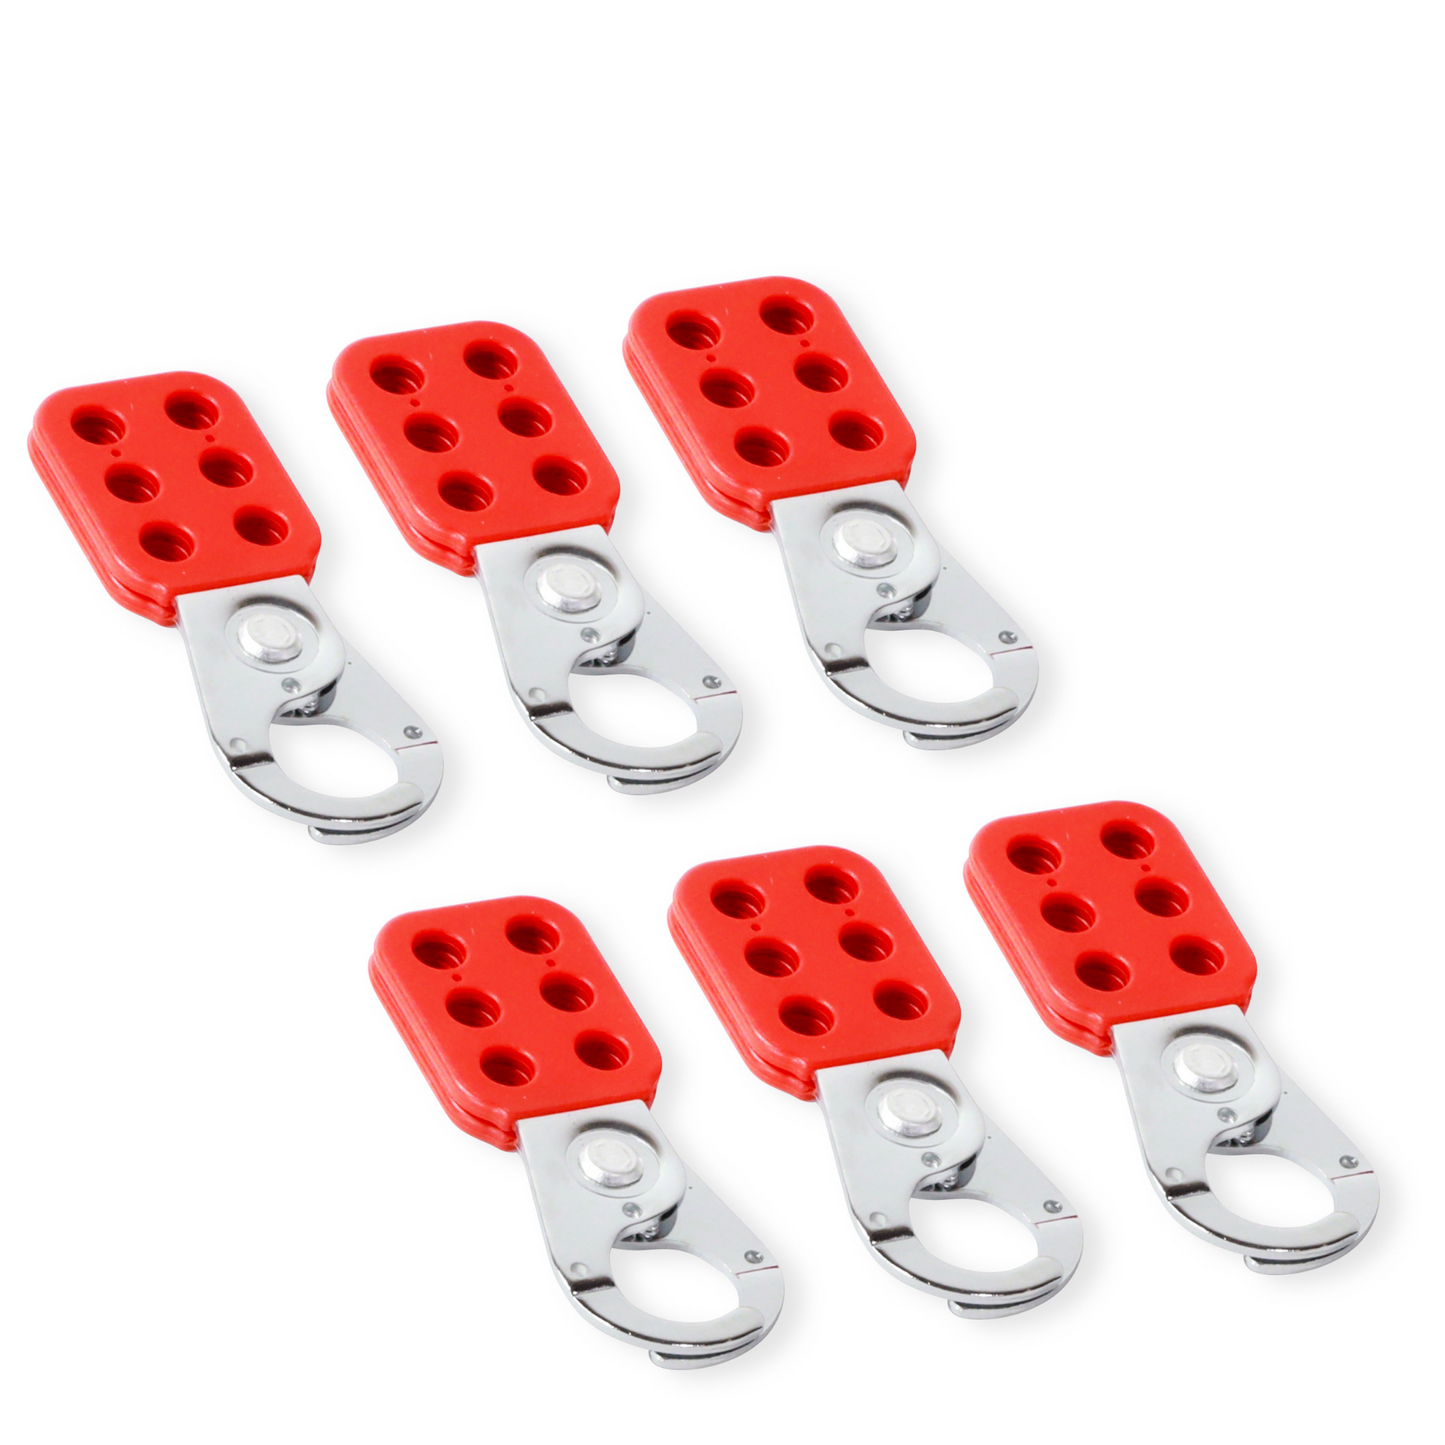 six lockout tagout hasps, each with a chrome-plated steel jaw and six holes in the red handle